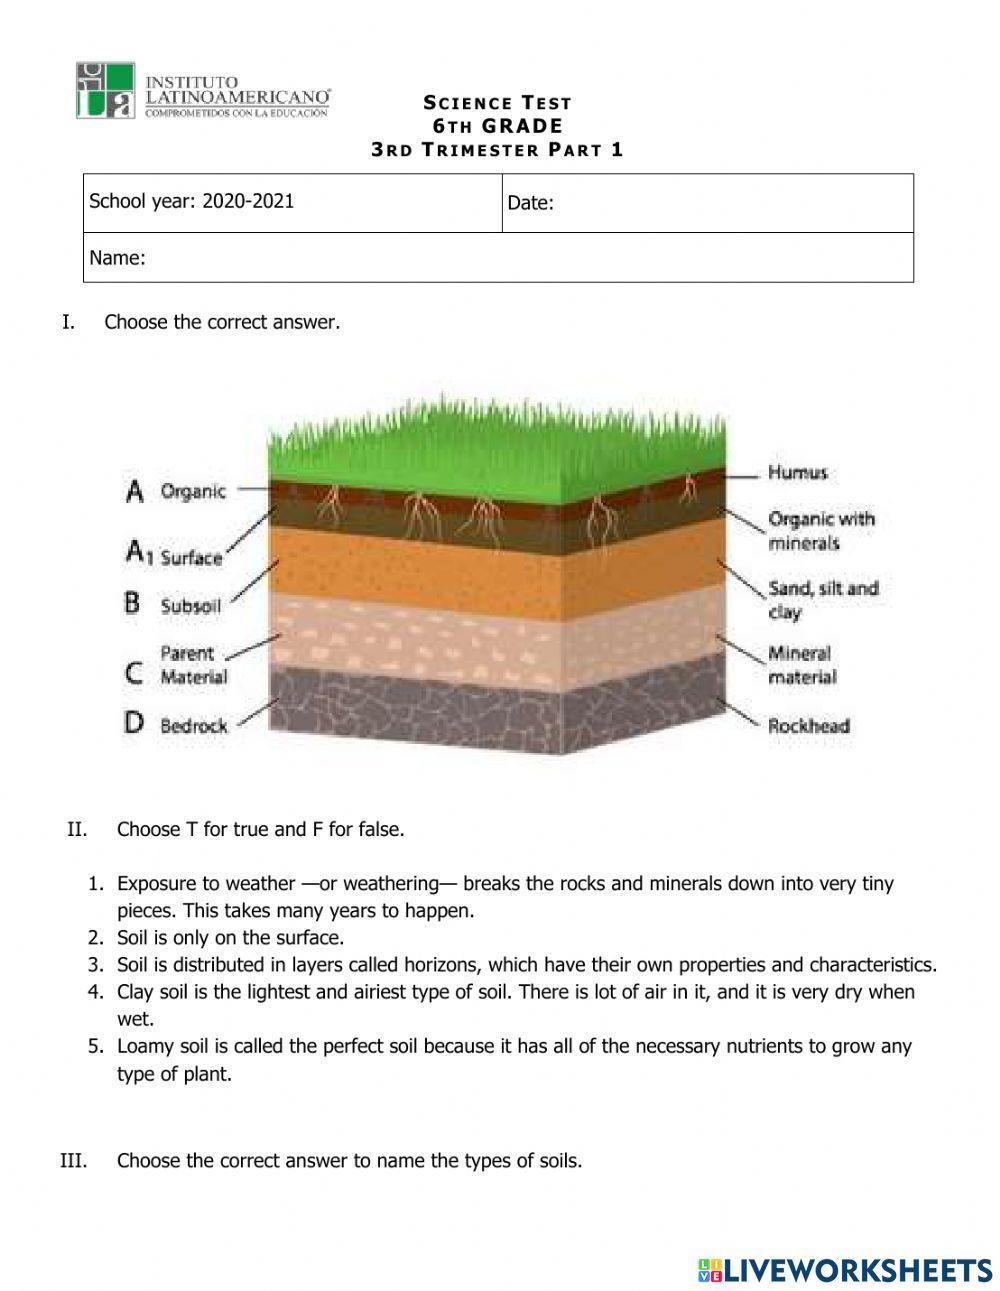 SCIENCE TEST (Soil formation and States of Matter)